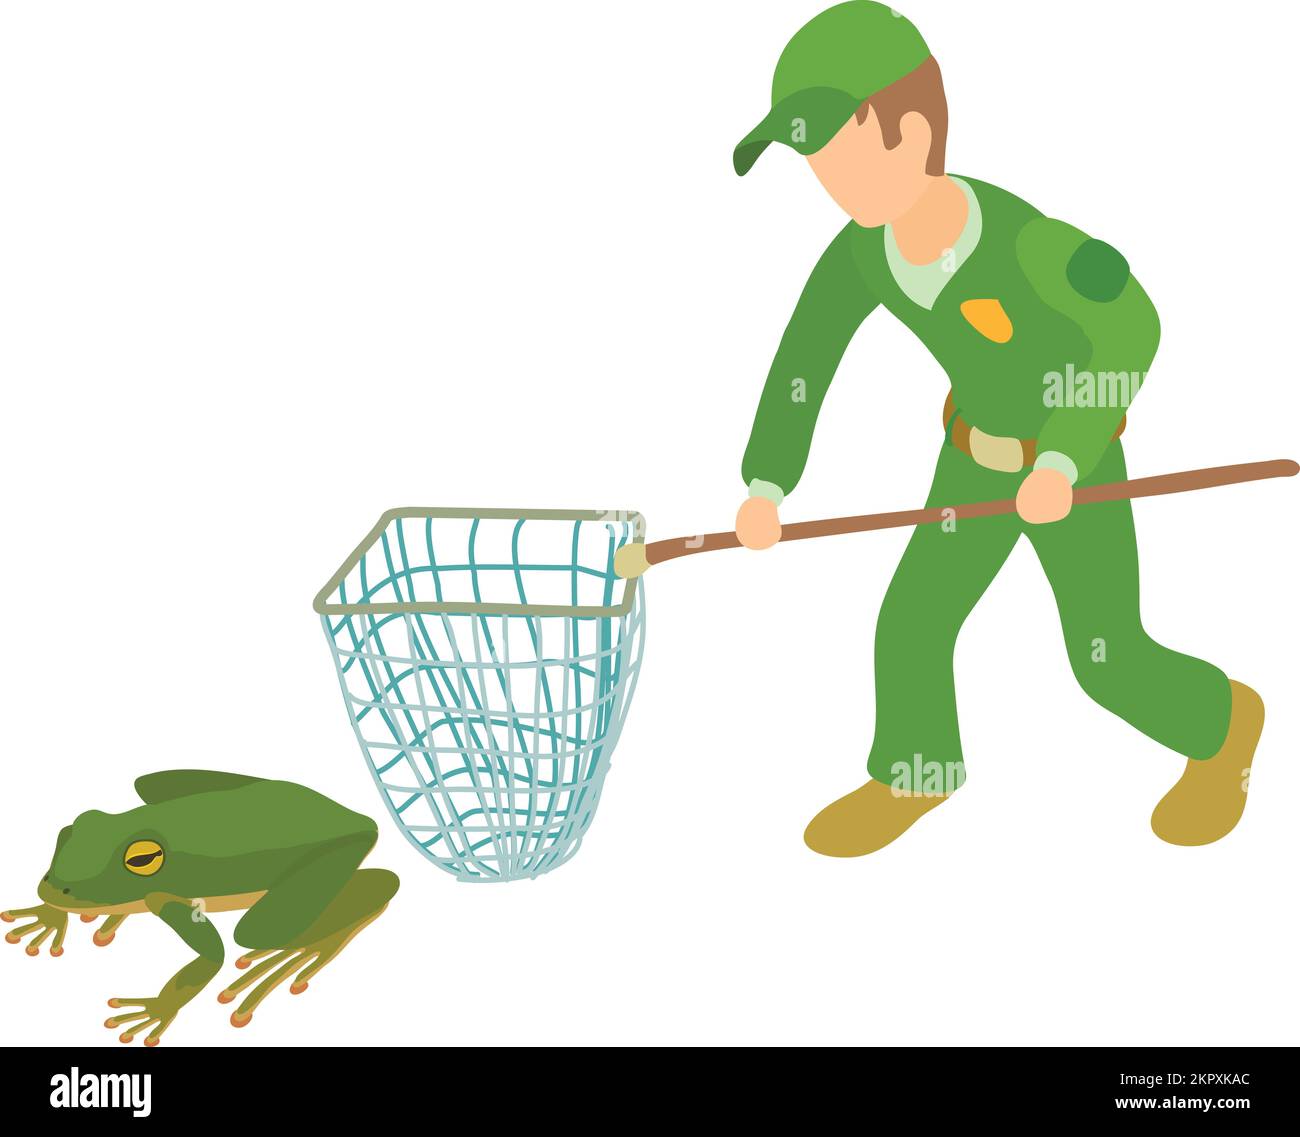 https://c8.alamy.com/comp/2KPXKAC/frog-trapping-icon-isometric-vector-man-in-uniform-with-landing-net-near-frog-capturing-of-cold-blooded-animal-2KPXKAC.jpg